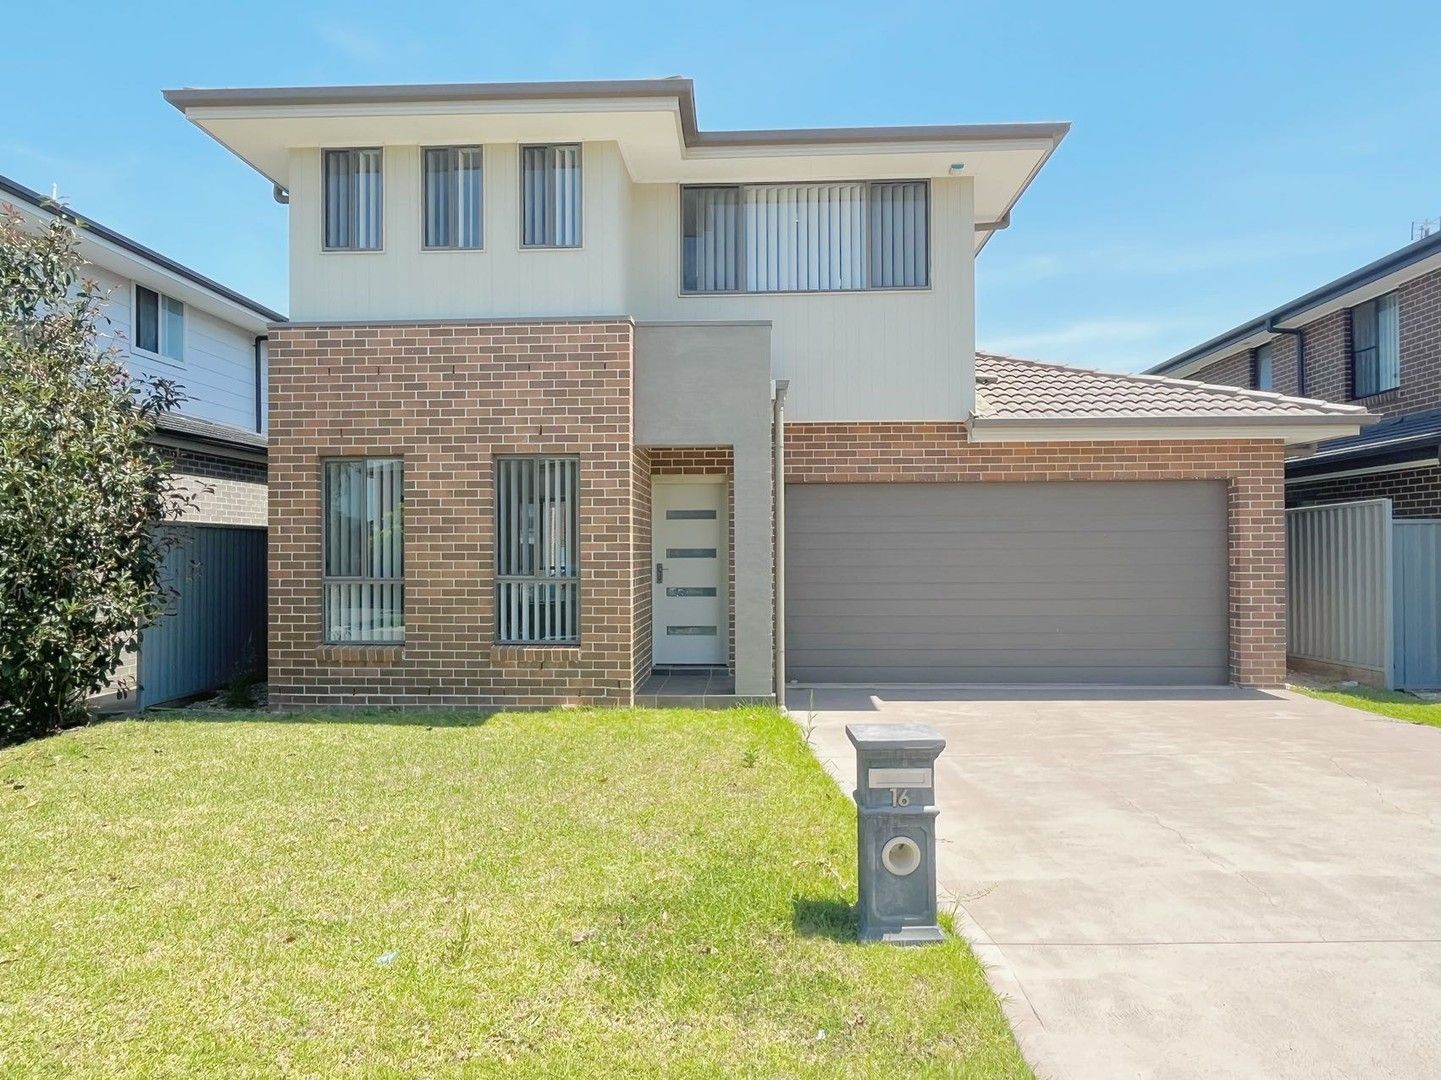 5 bedrooms House in 16 Yating Avenue SCHOFIELDS NSW, 2762